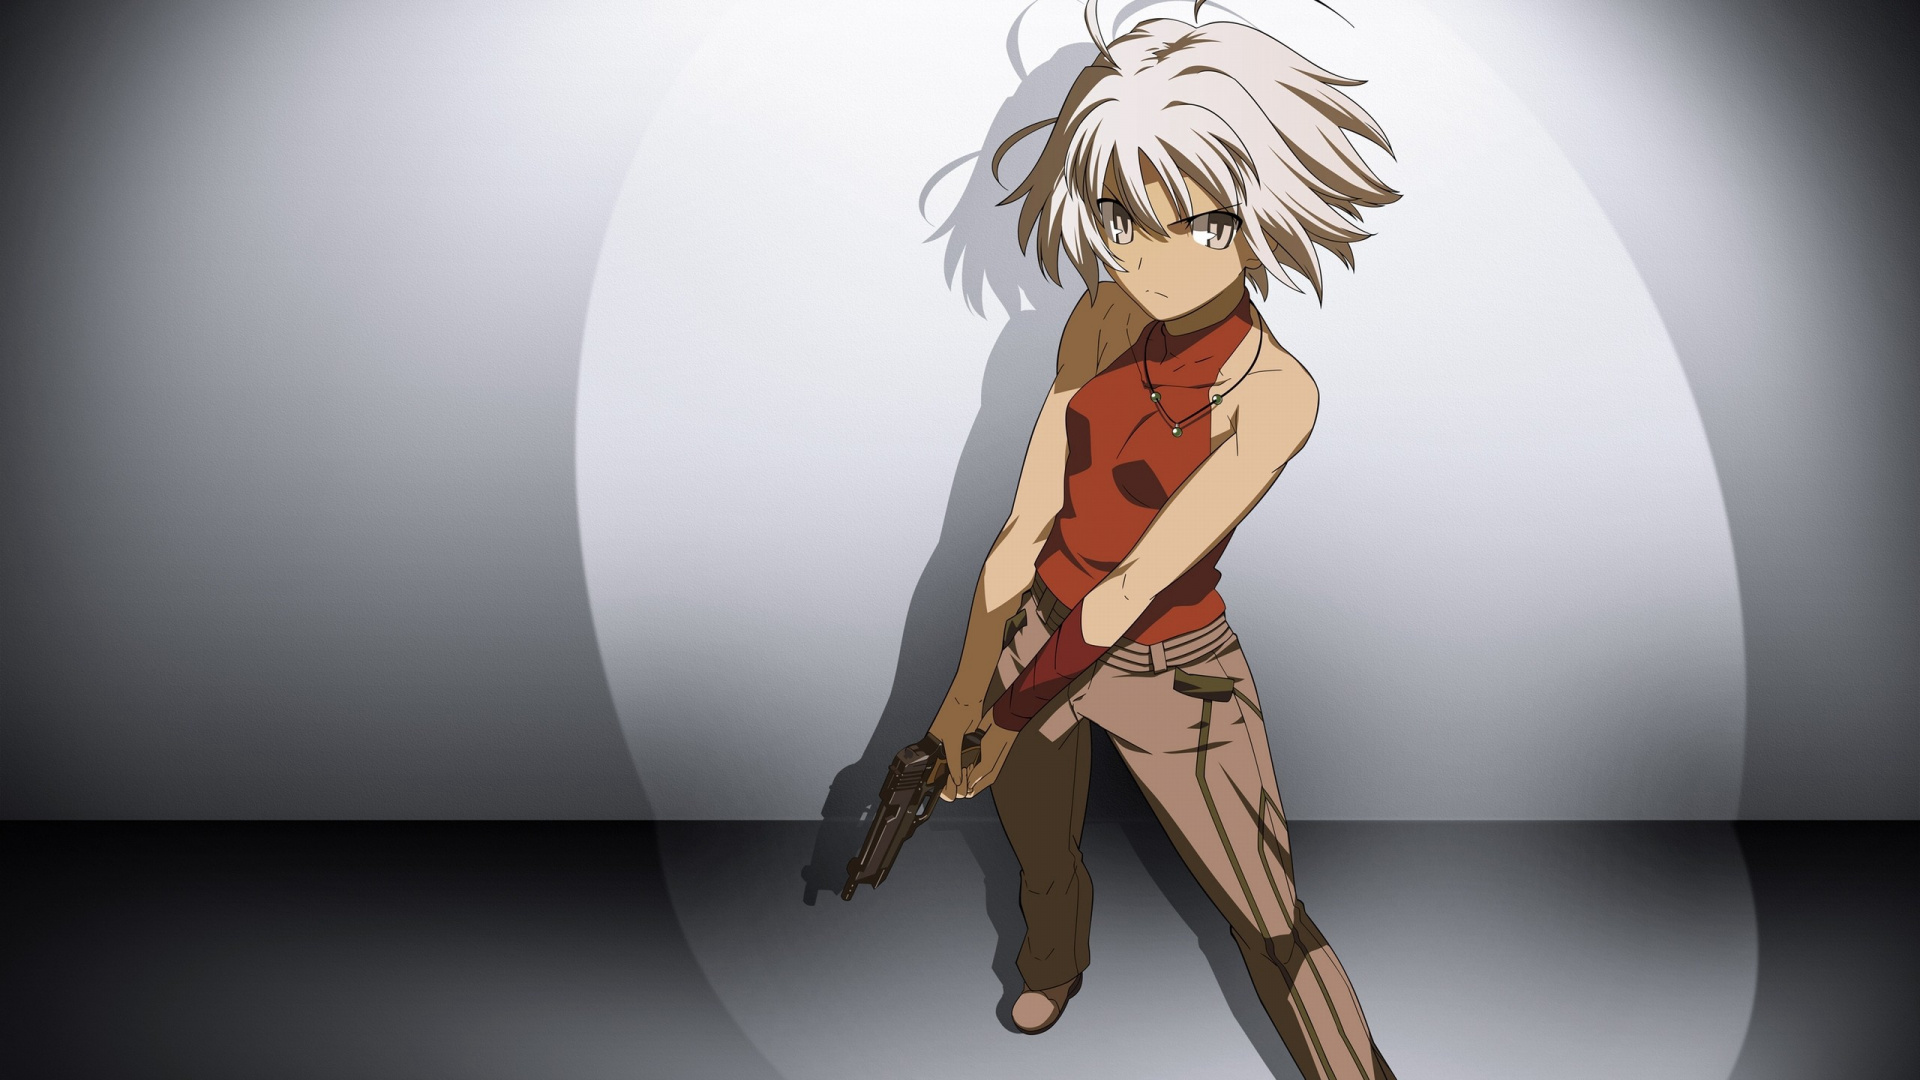 Personnage D'anime Masculin Aux Cheveux Blonds. Wallpaper in 1920x1080 Resolution